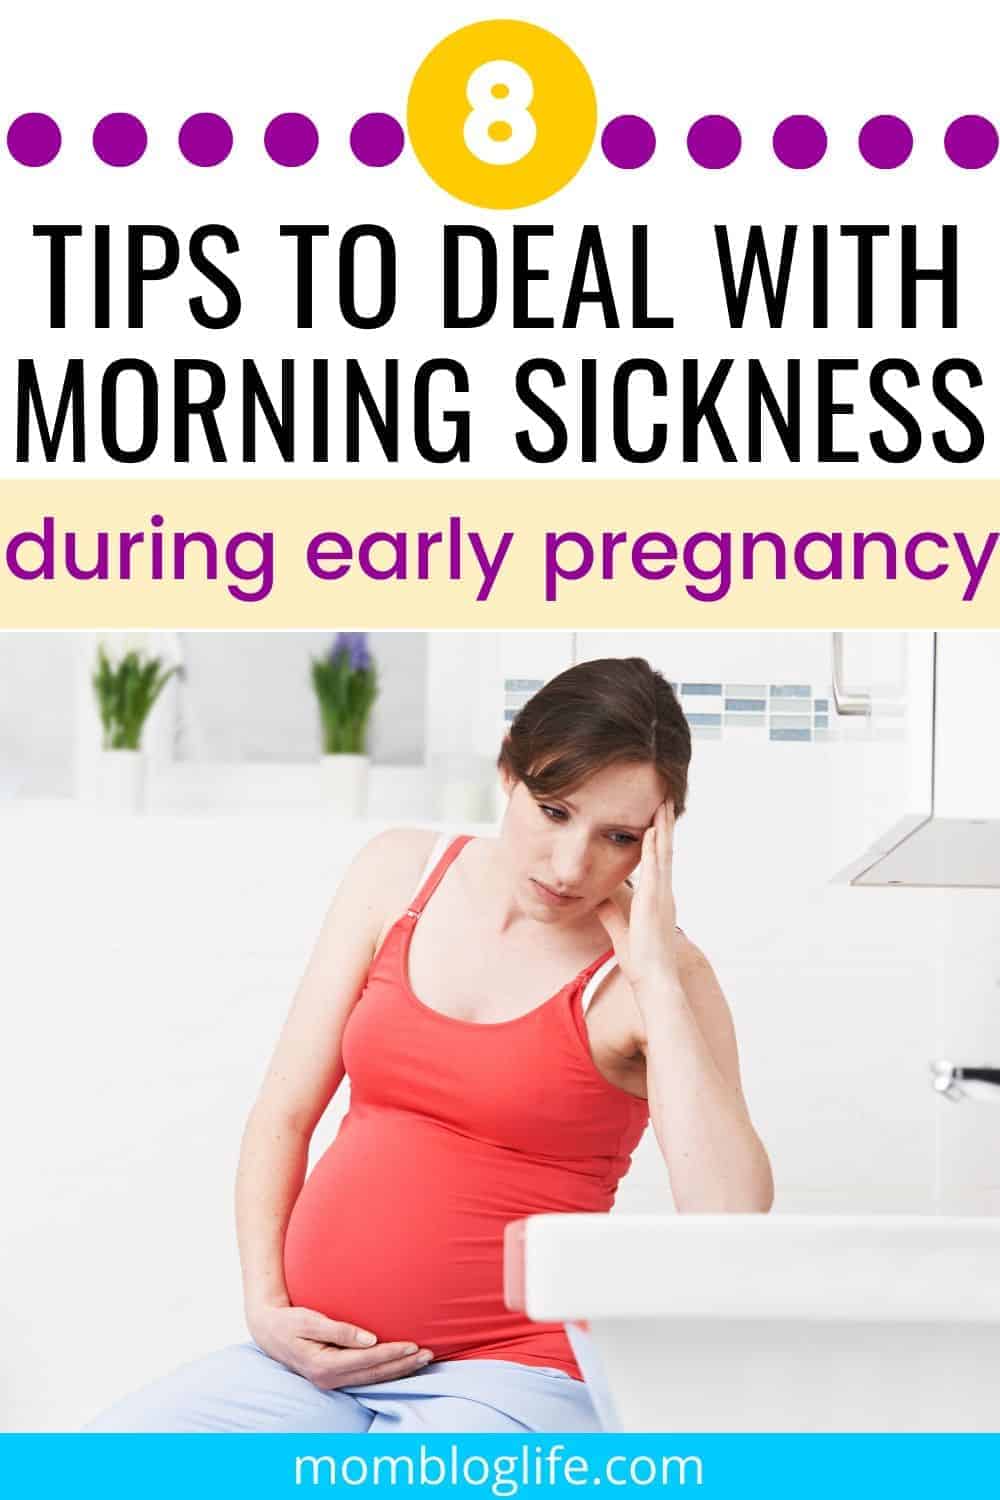 does travel make morning sickness worse